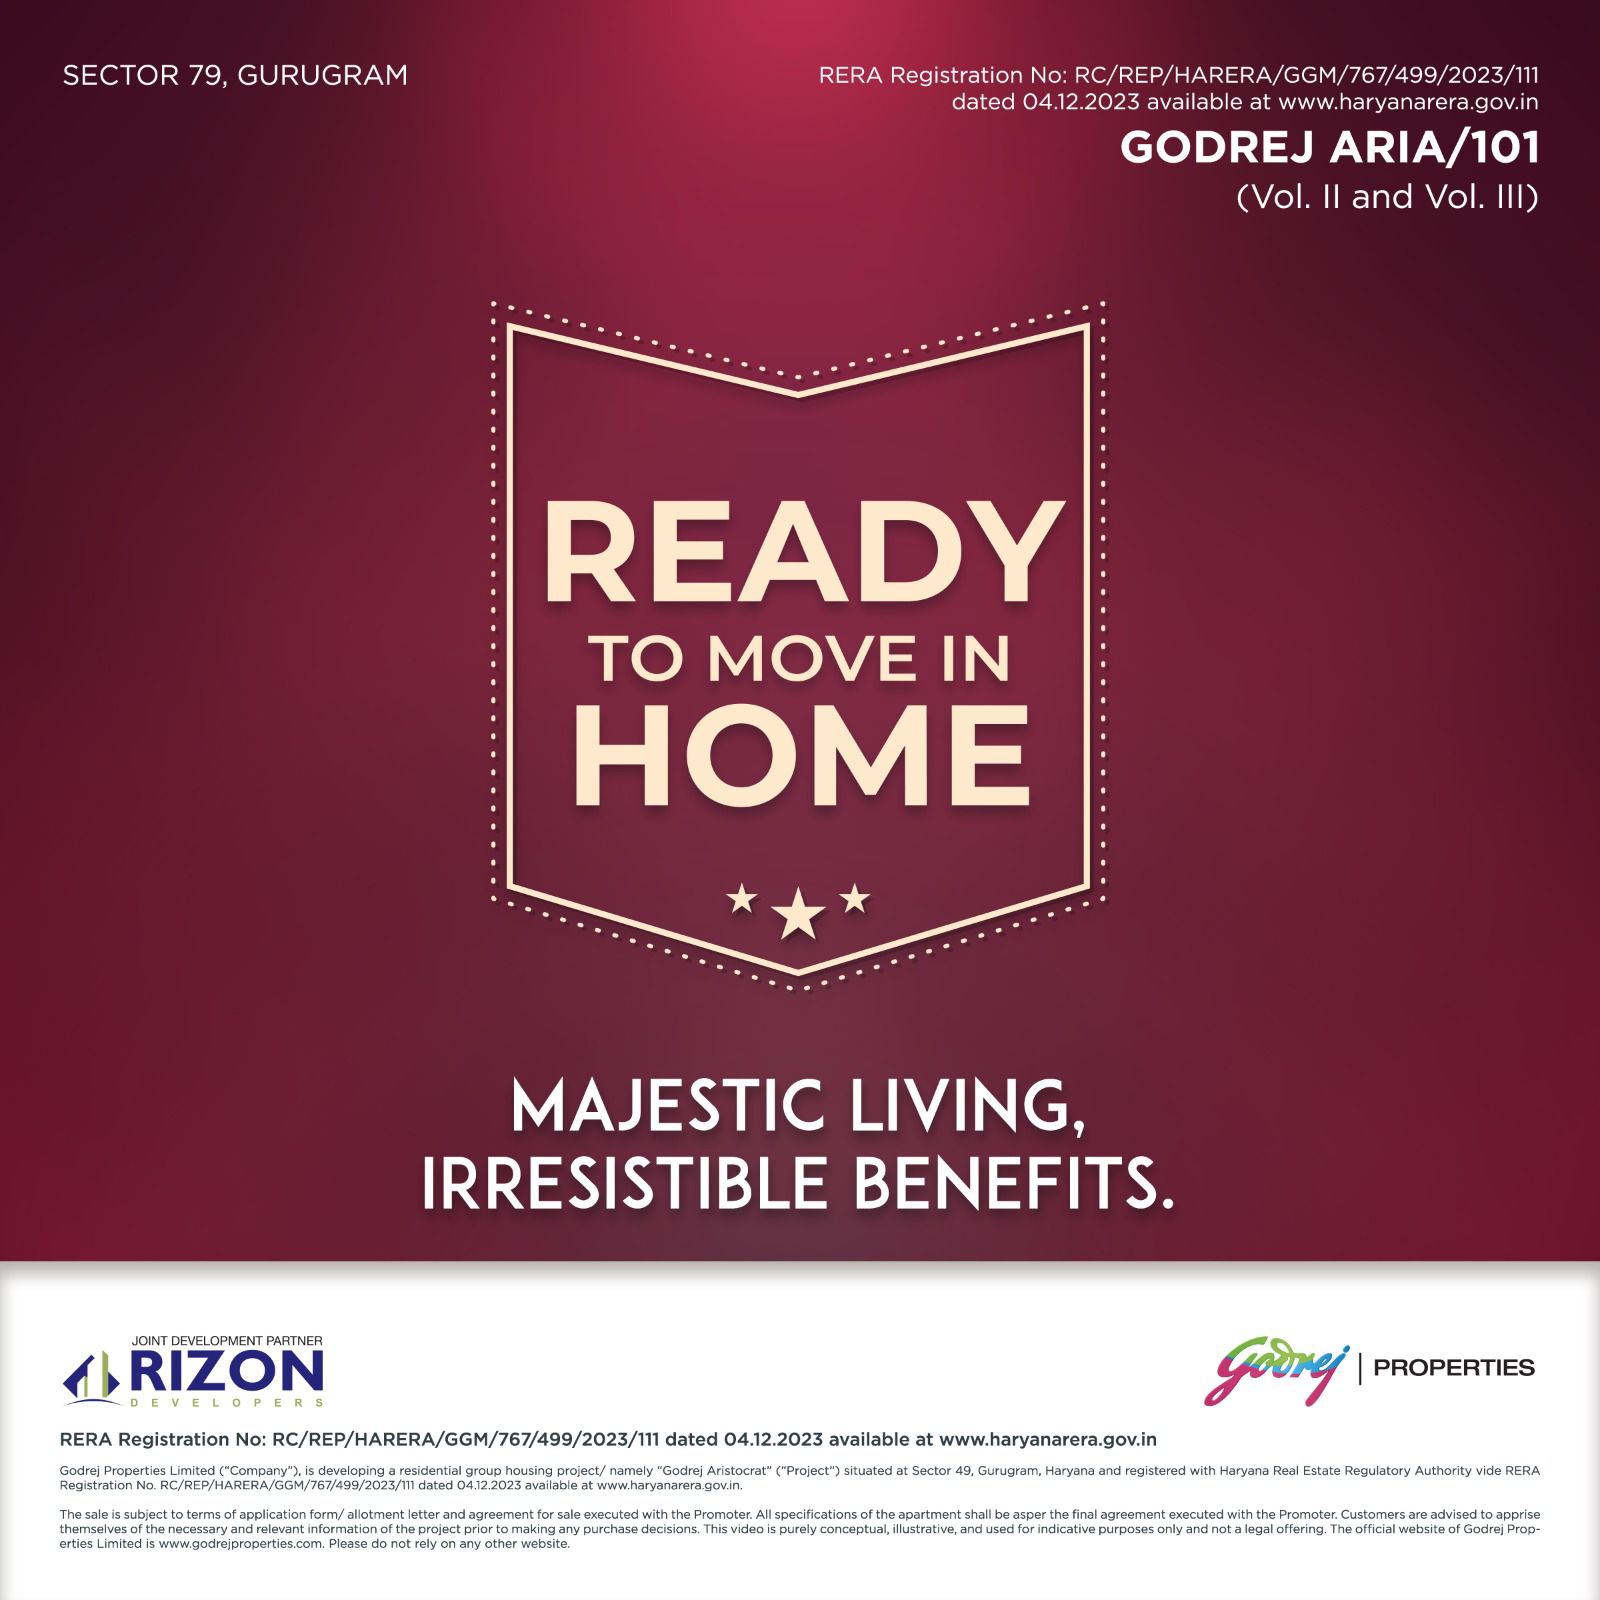 Step into Splendor at Godrej Aria/101: Luxurious Ready-to-Move Homes in Gurugram Update